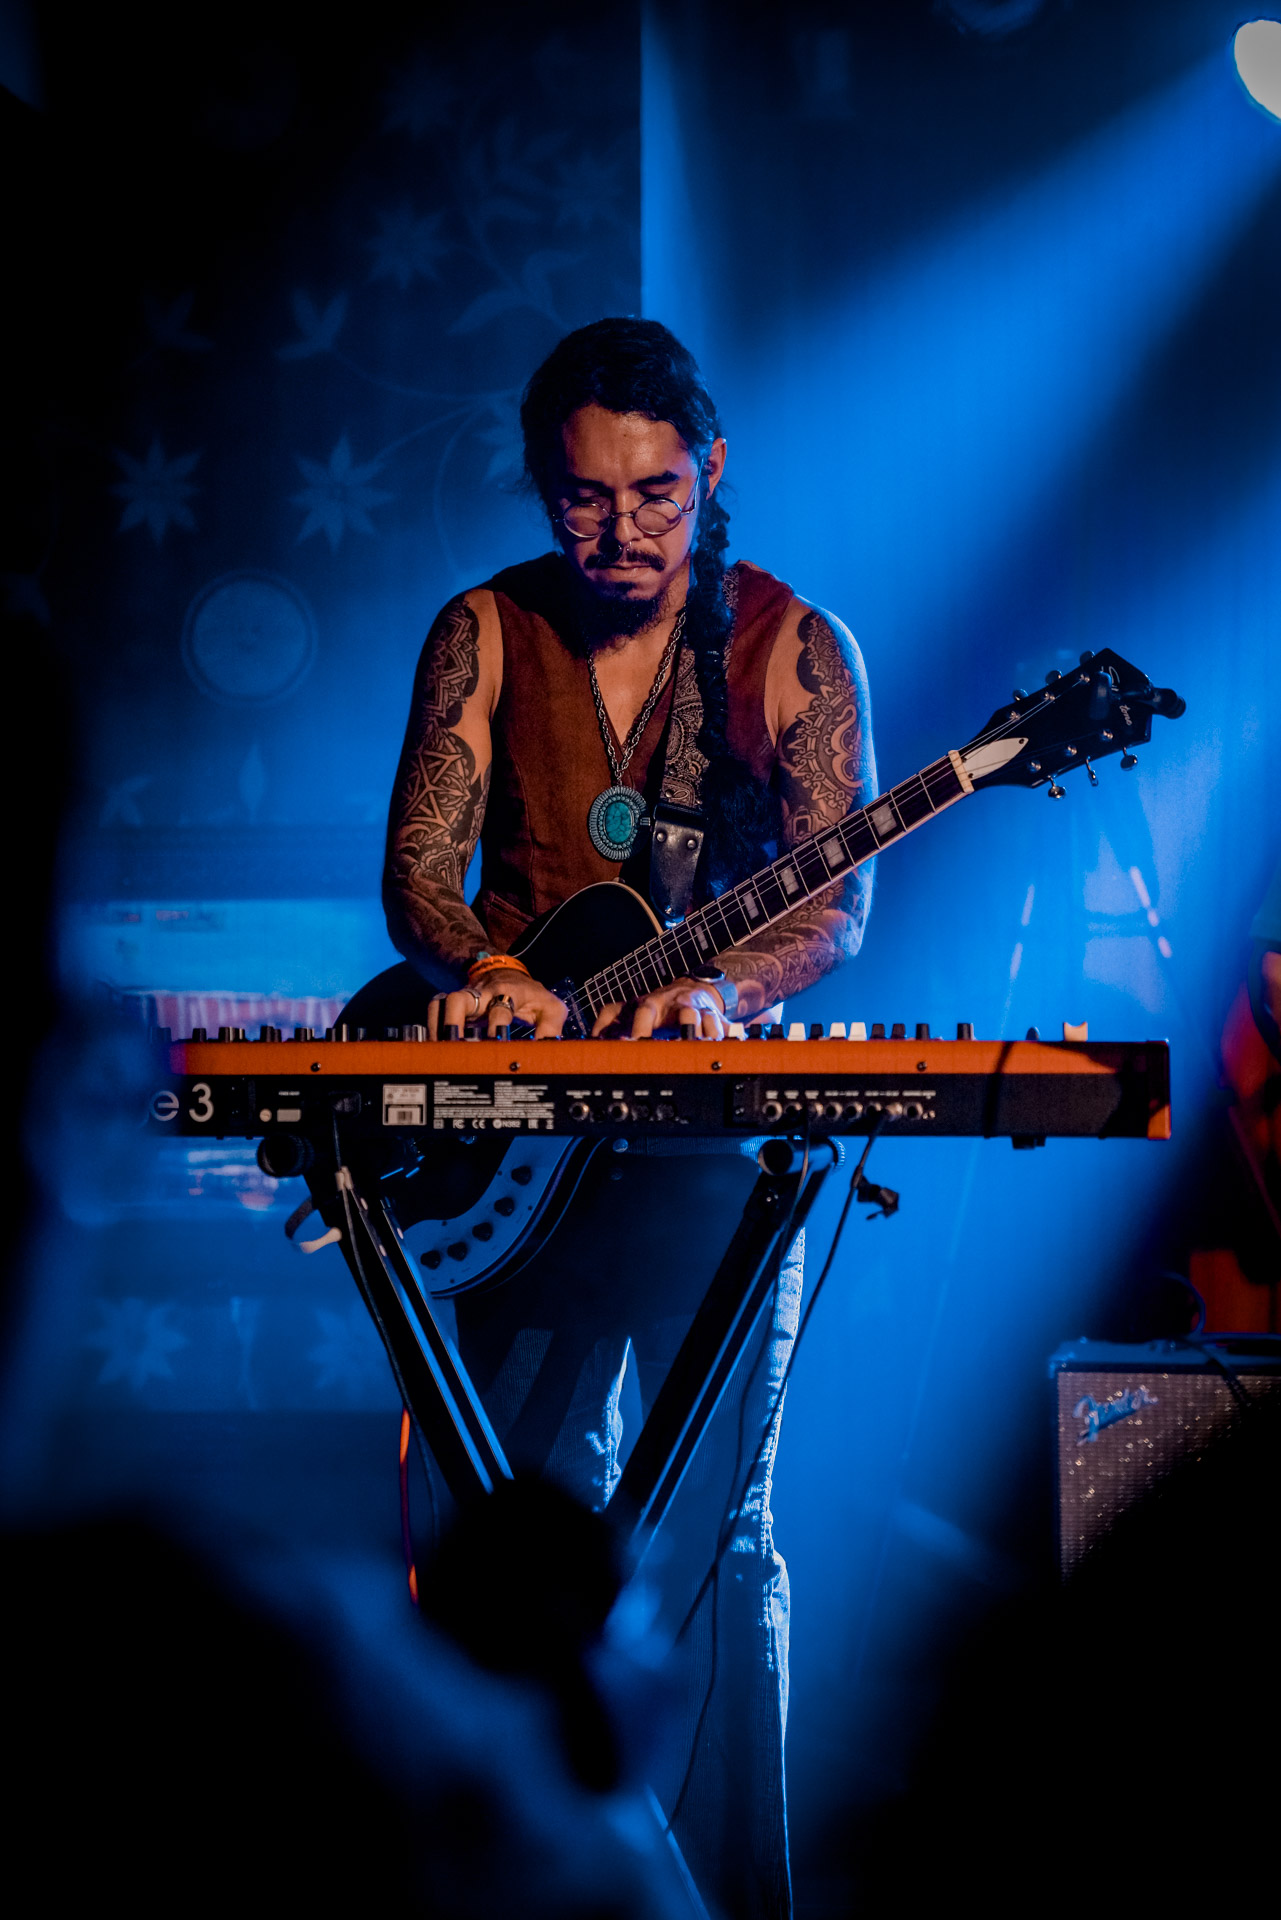 A musician playing keyboard with a guitar strapped around them